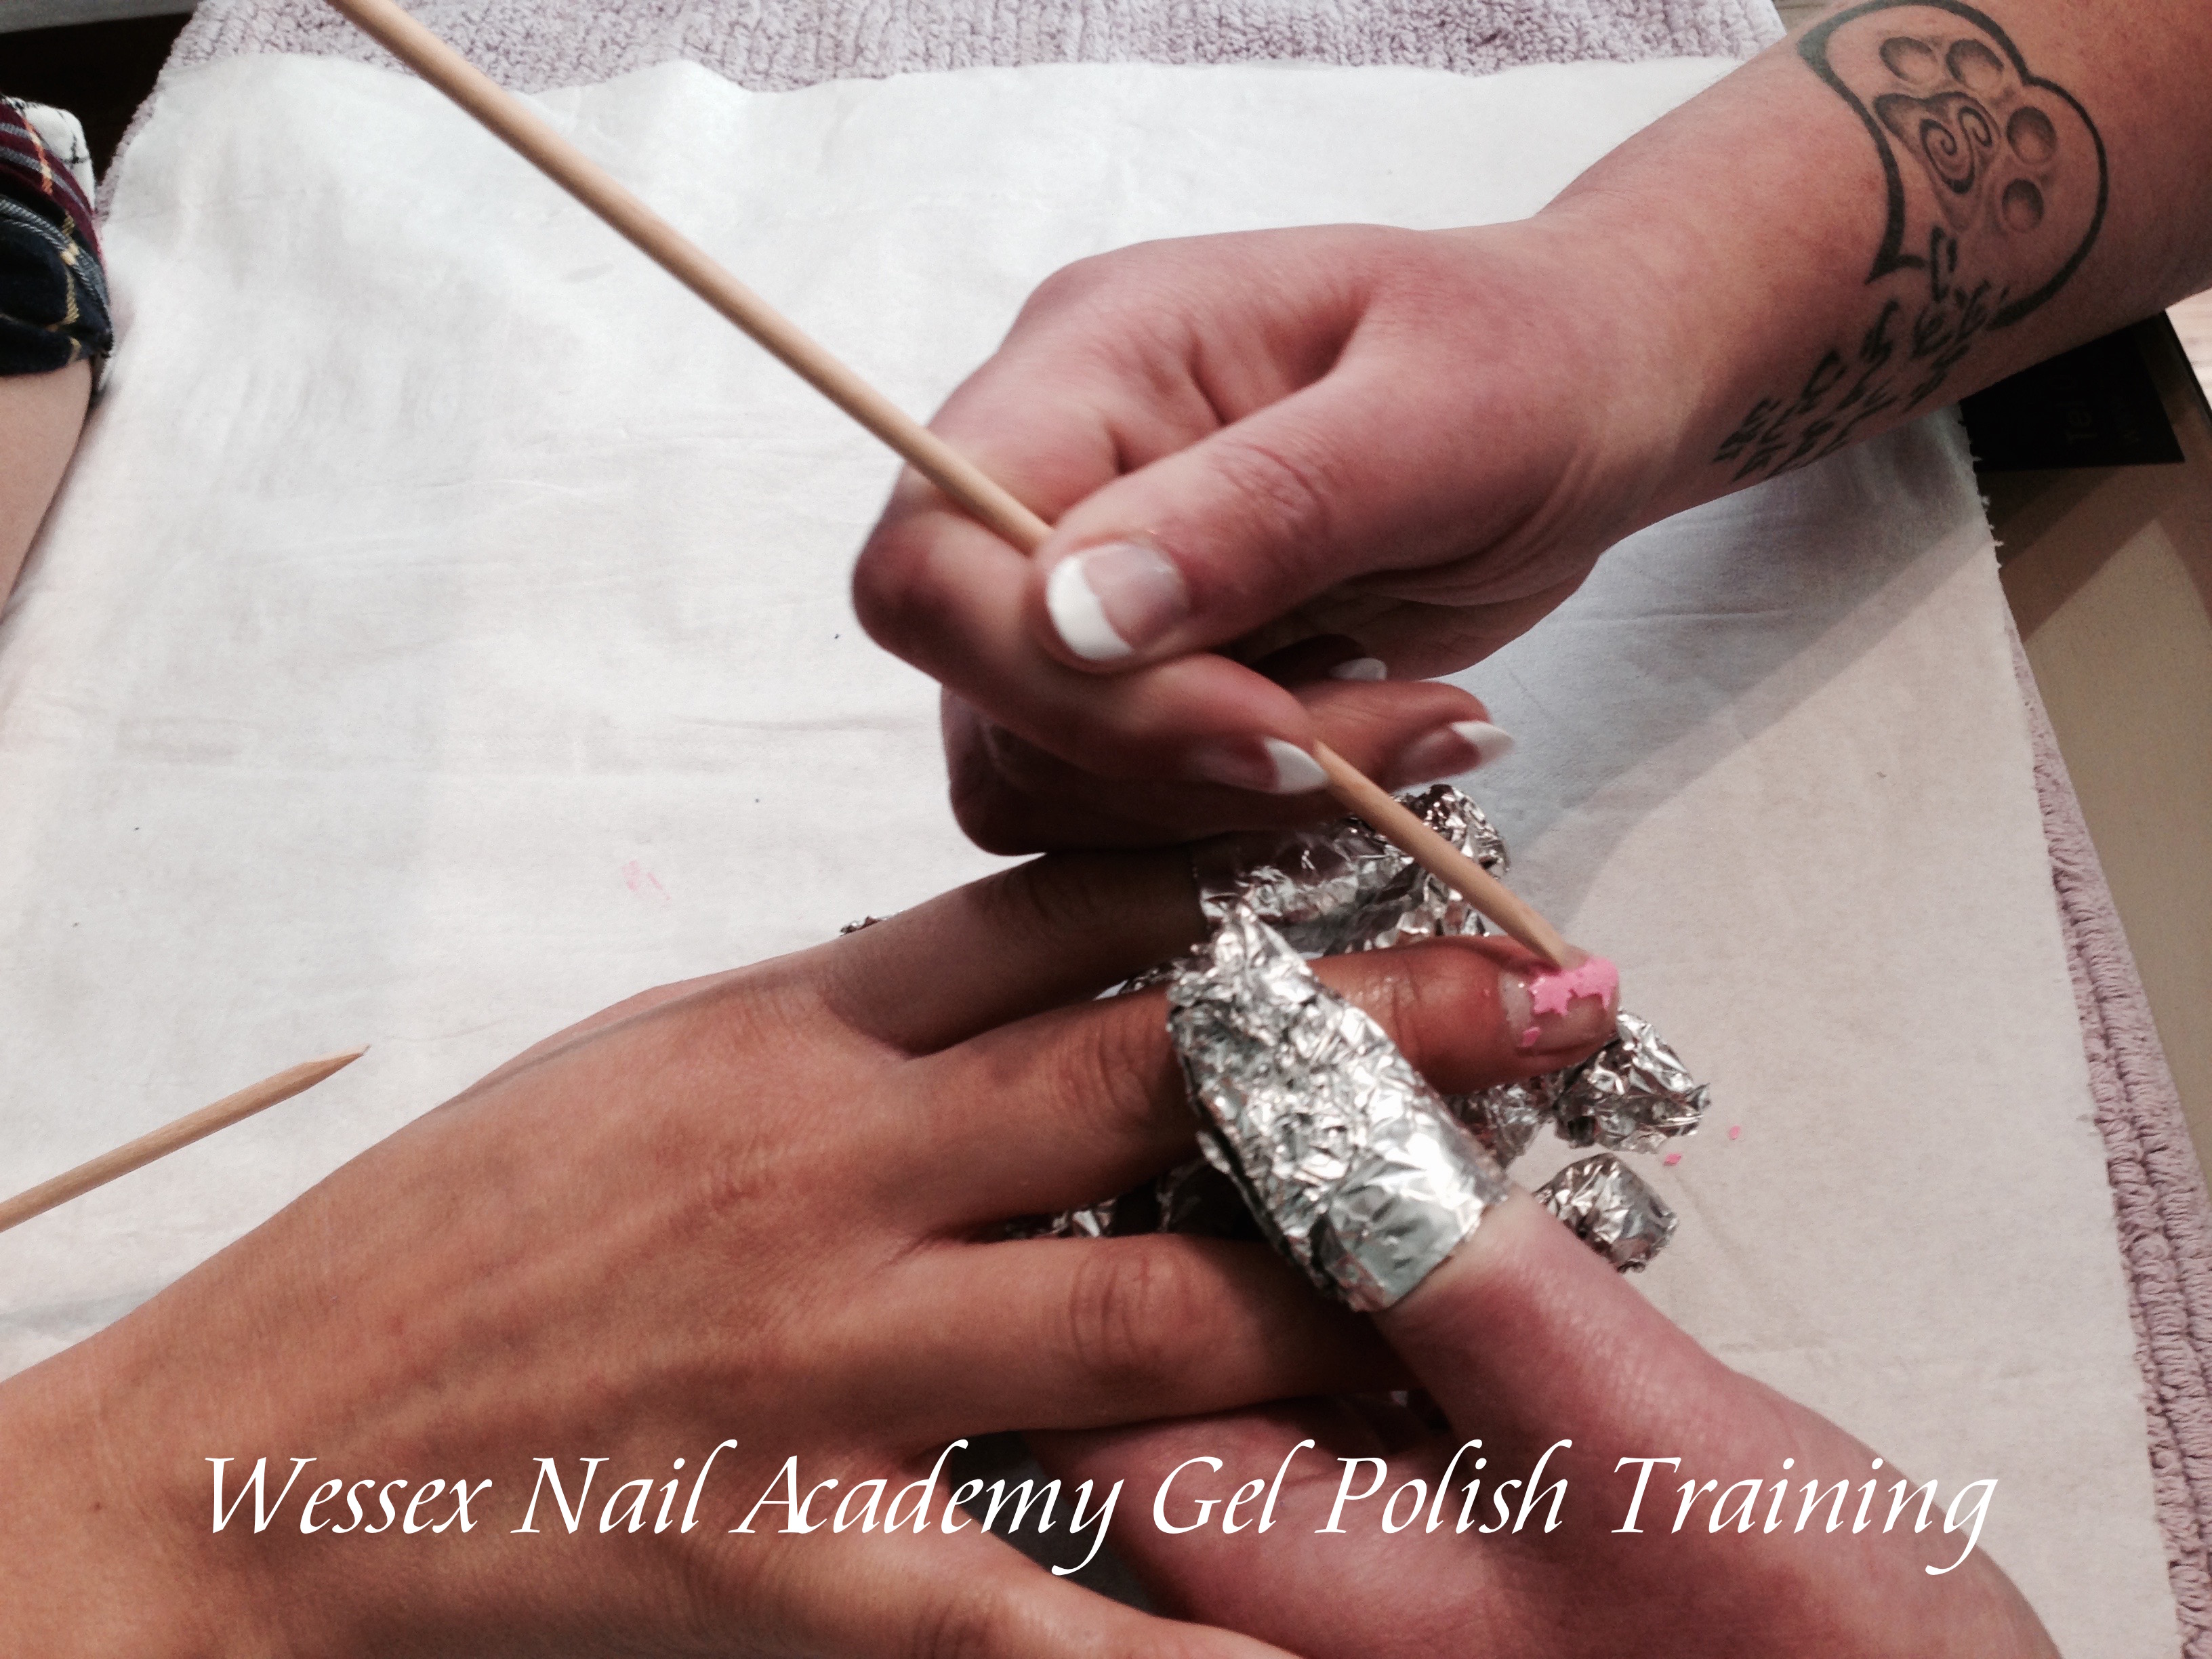 Gel Polish Beginners Manicure and Pedicure Nail training Courses, Nail extension training, nail training course, Wessex Nail Academy Okeford Fitzpaine, Dorset